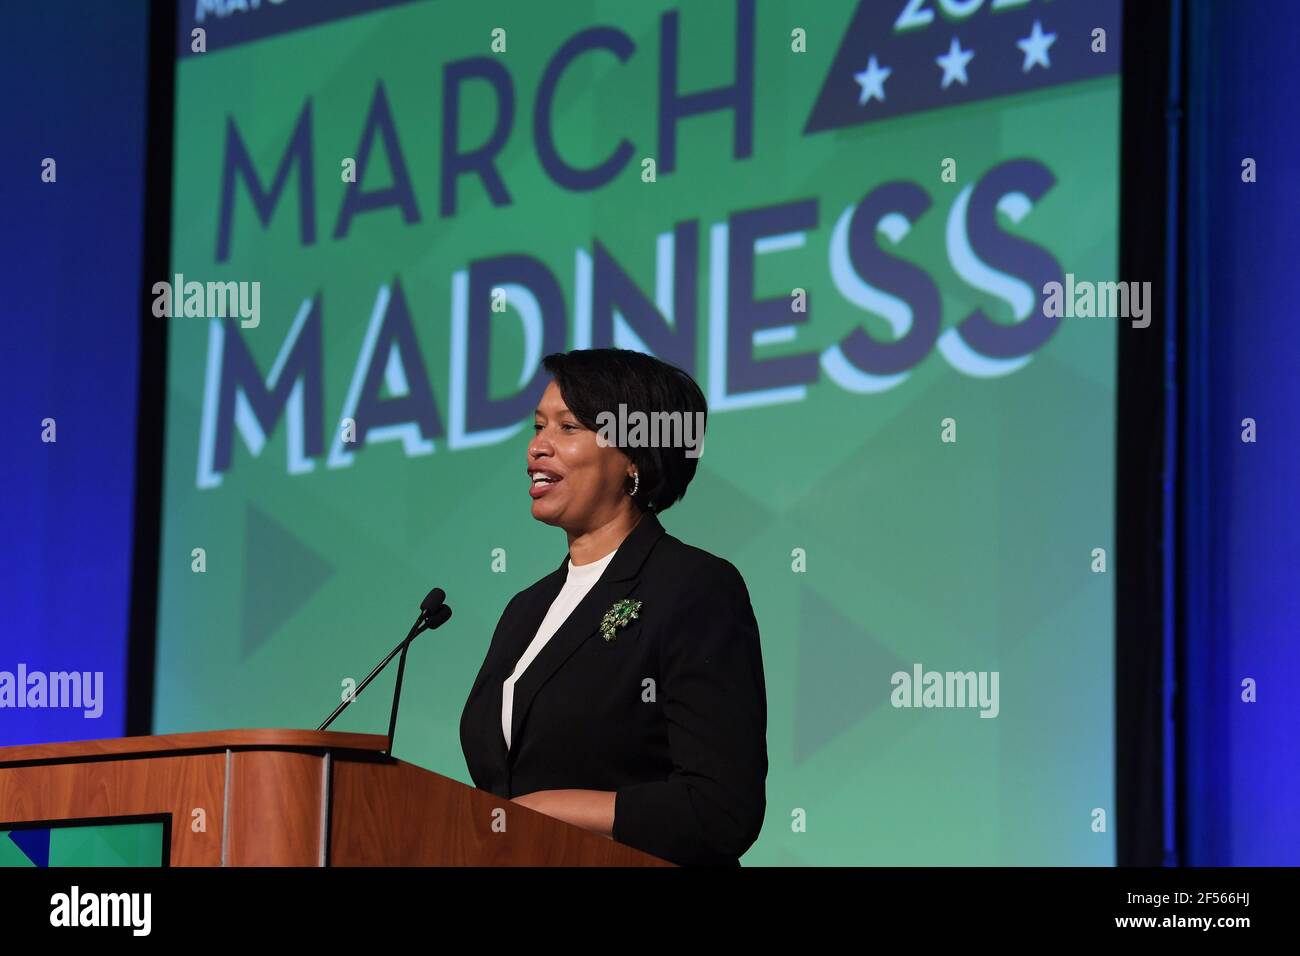 Washington, District of Columbia, USA. 24th Mar, 2021. DC Mayor MURIEL BOWSER deliver remarks about DC HOPE: Housing, Opportunity, Prosperity and Equity, during the 7th Annual March Madness, today on March 24, 2021 at Walter E. Washington Convention Center in Washington DC, USA. Credit: Lenin Nolly/ZUMA Wire/Alamy Live News Stock Photo